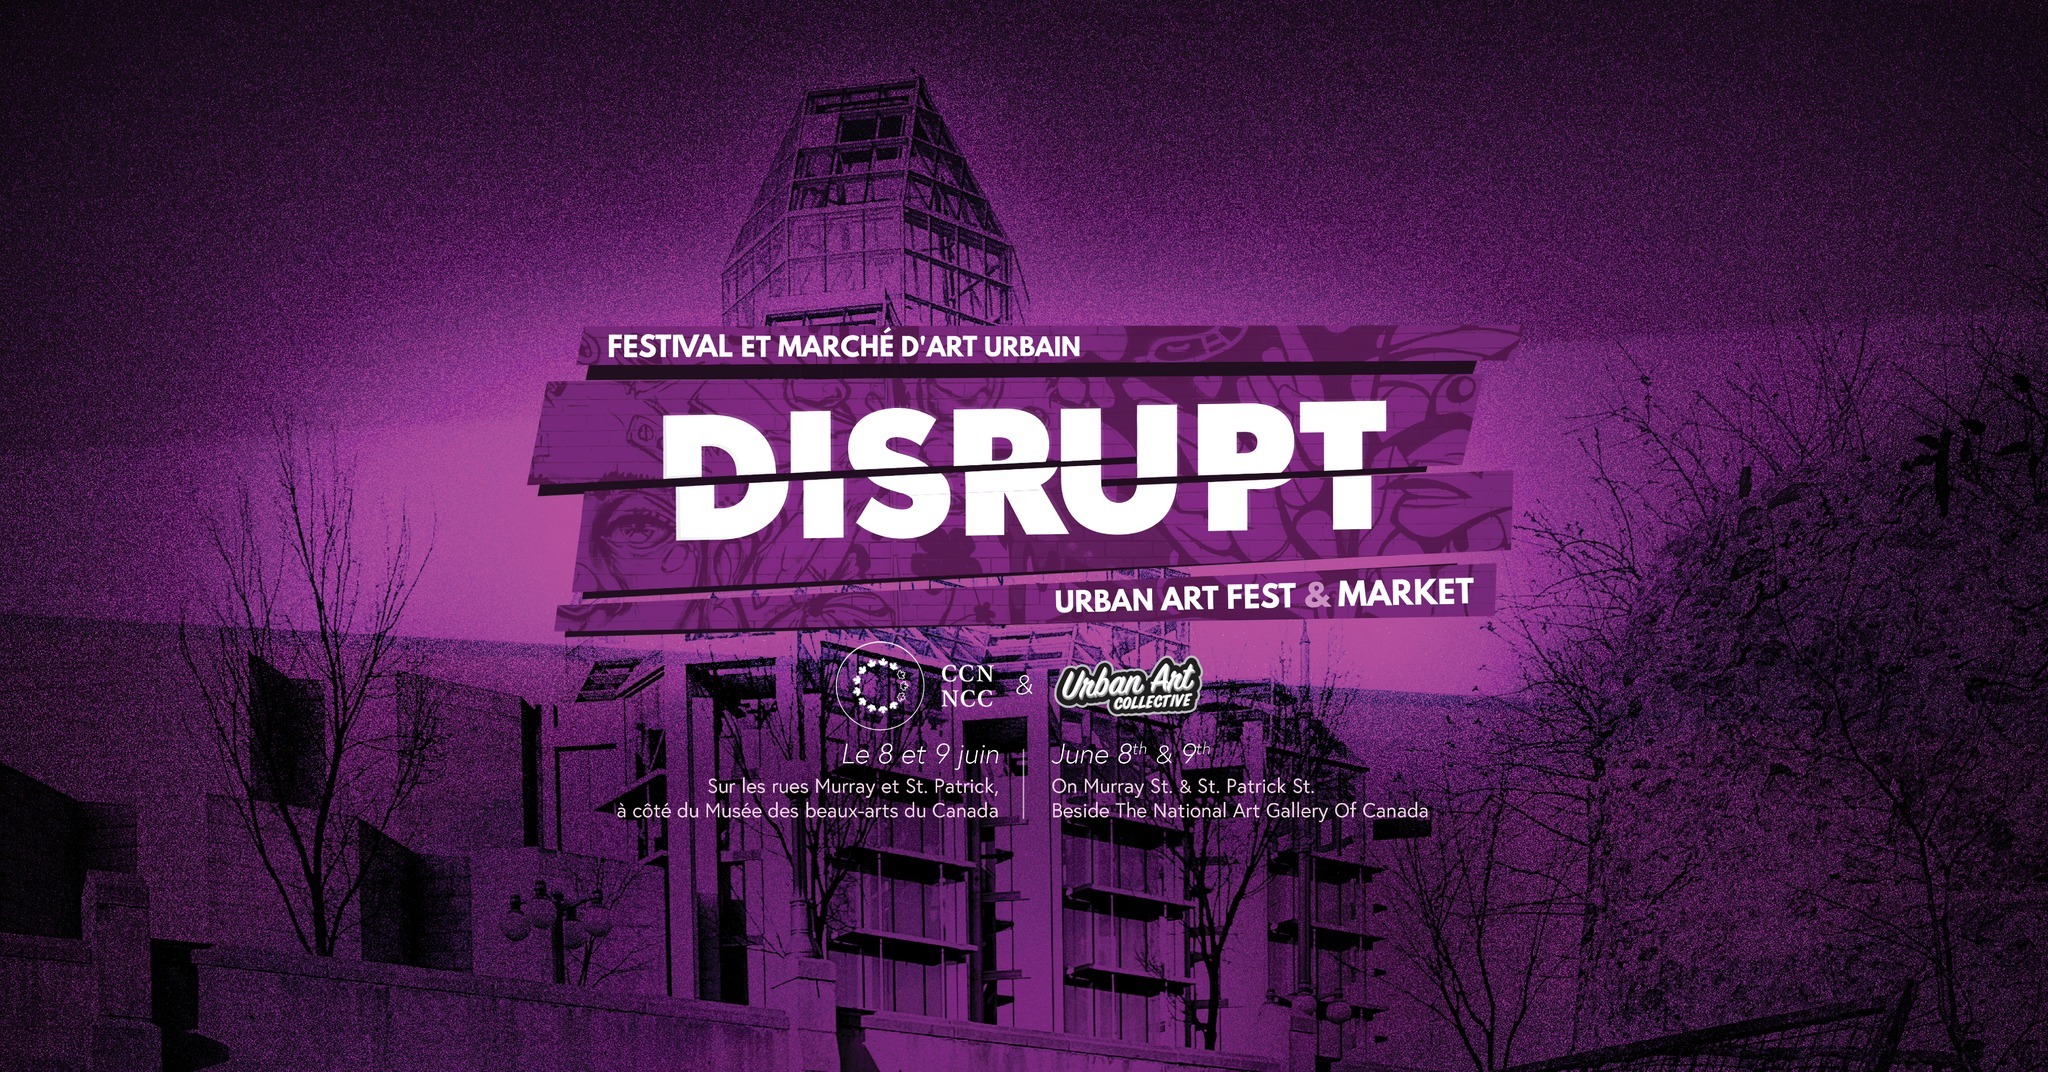 Disrupt event poster